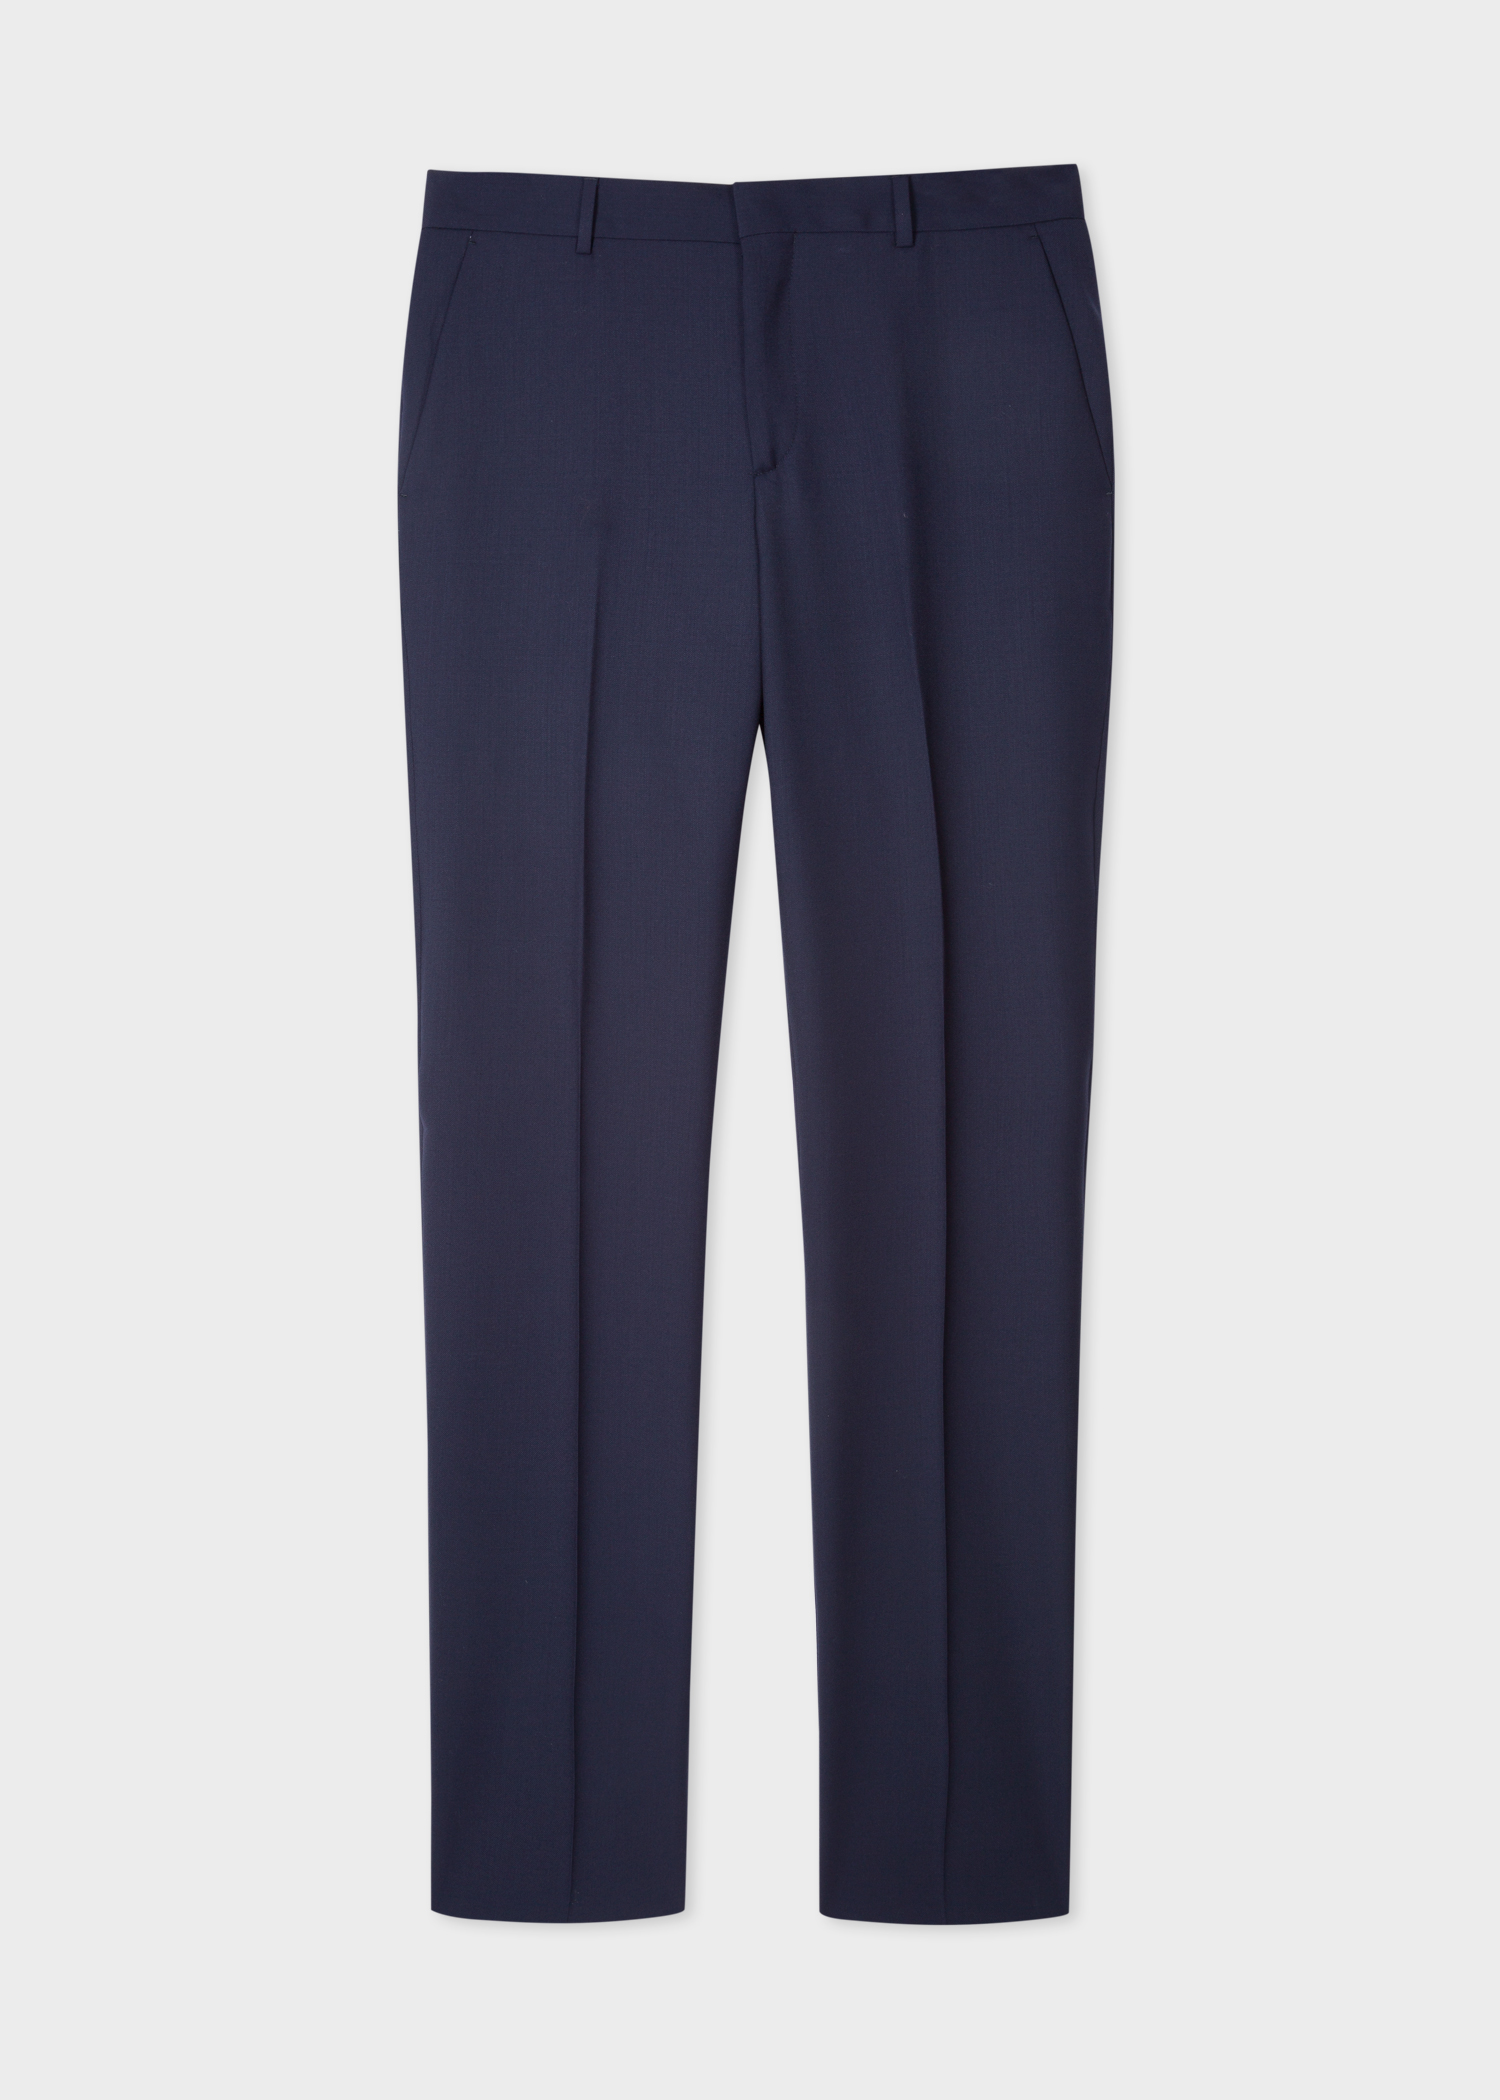 Trousers view - The Piccadilly - Men's Tailored-Fit Navy Blue Wool Suit 'A Suit To Travel In'